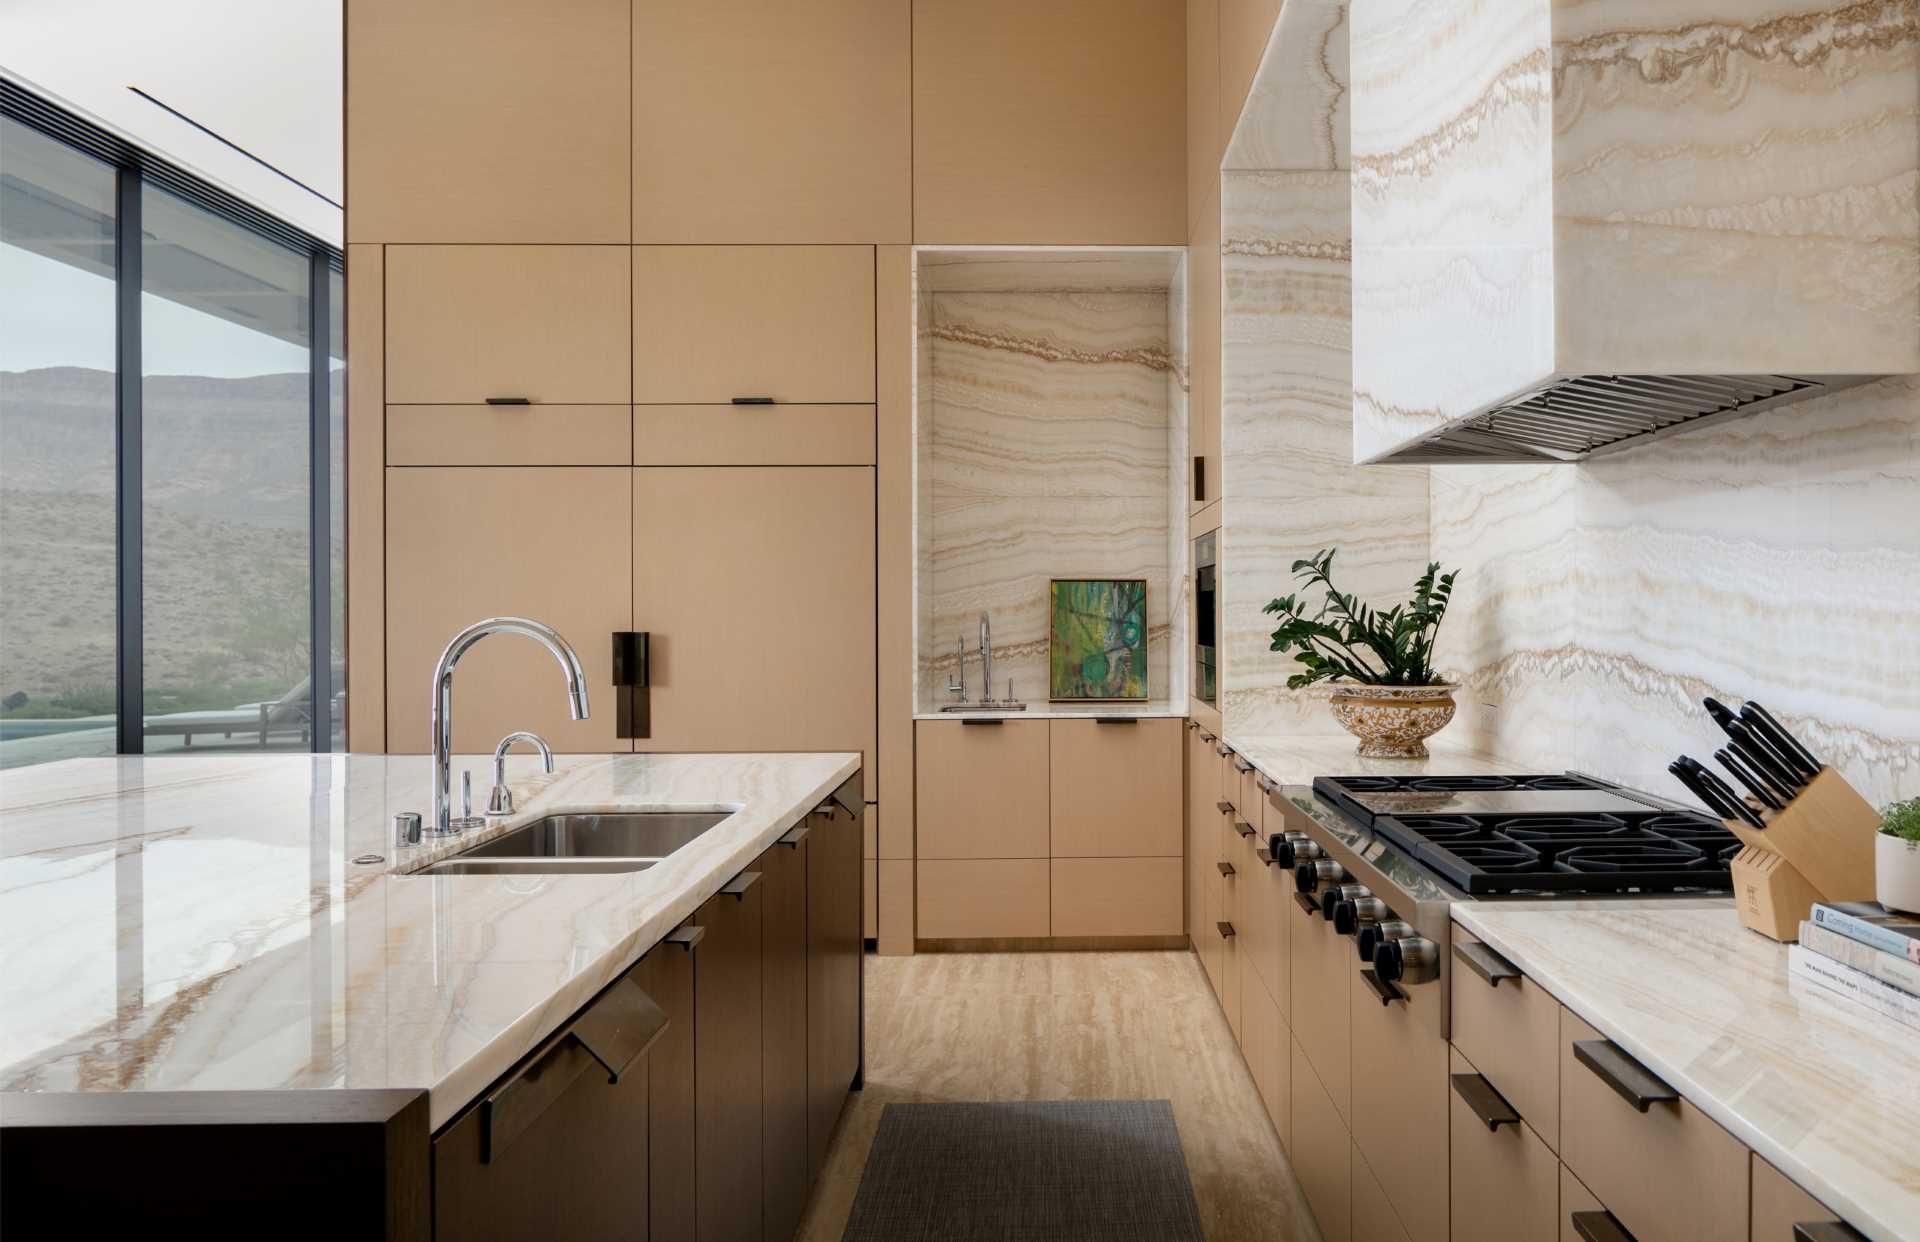 This modern kitchen has a palette that complements the desert colors found outside.